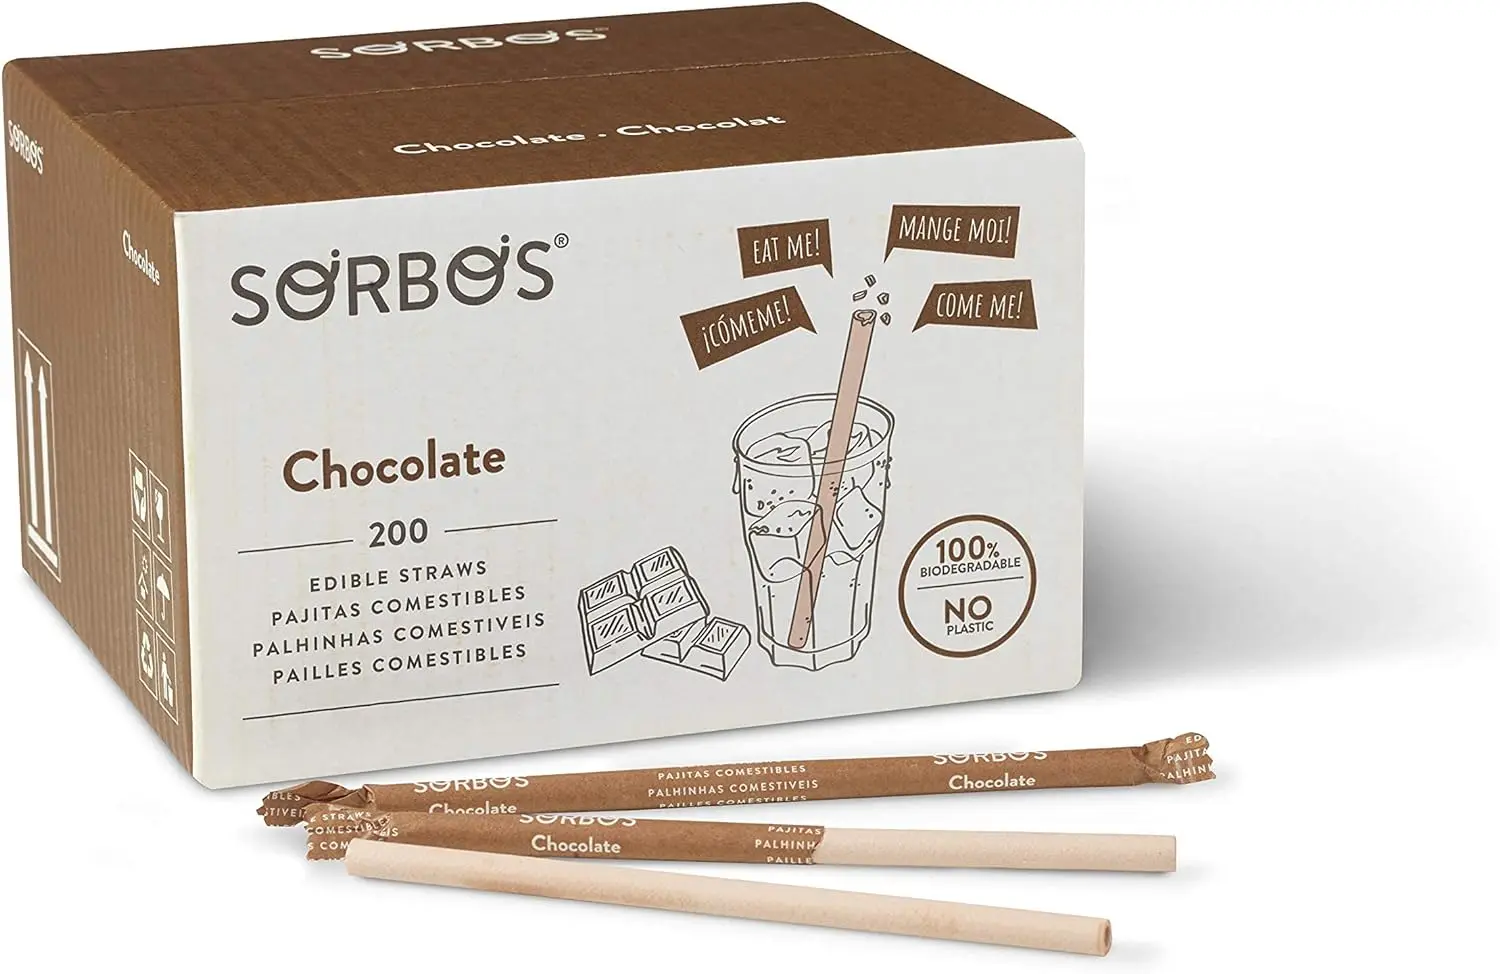 

Straws, Chocolate Flavored, Sustainable, Individually Packaged, No Plastic, No Allergens, No Gluten, 100 Percent Biodegradable,